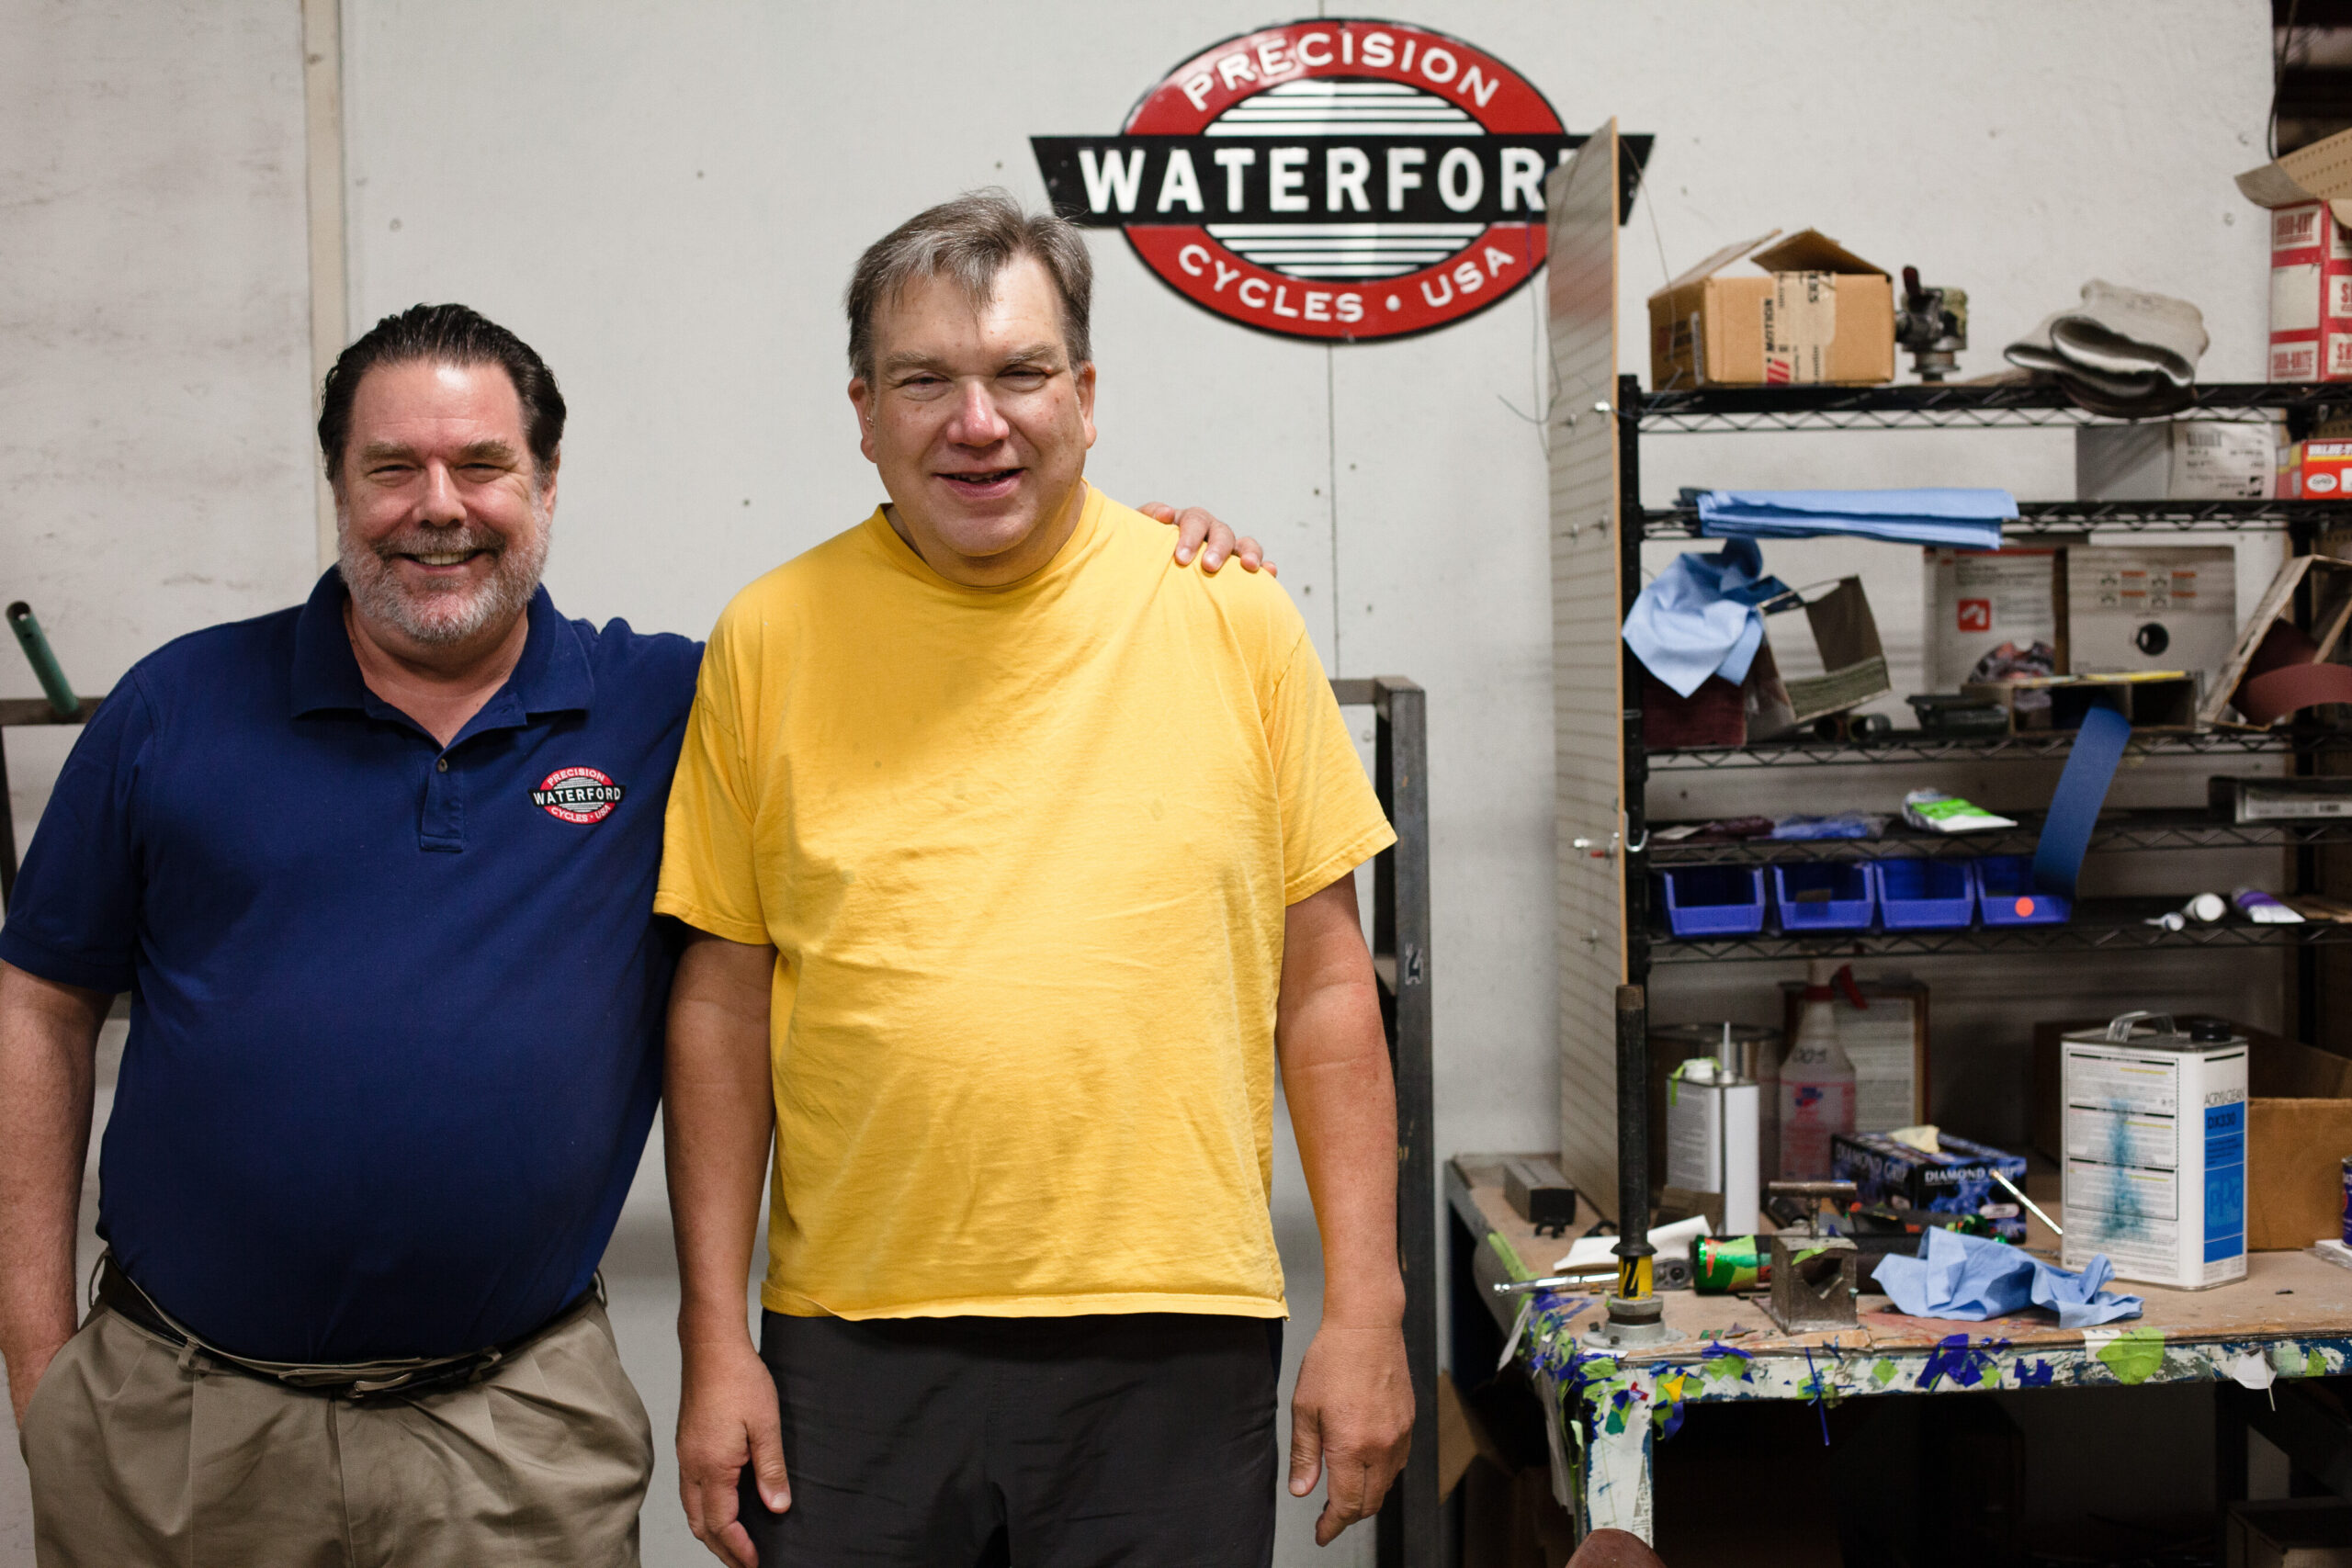 Waterford bicycle factory closes. So, too, does another chapter in Schwinn history